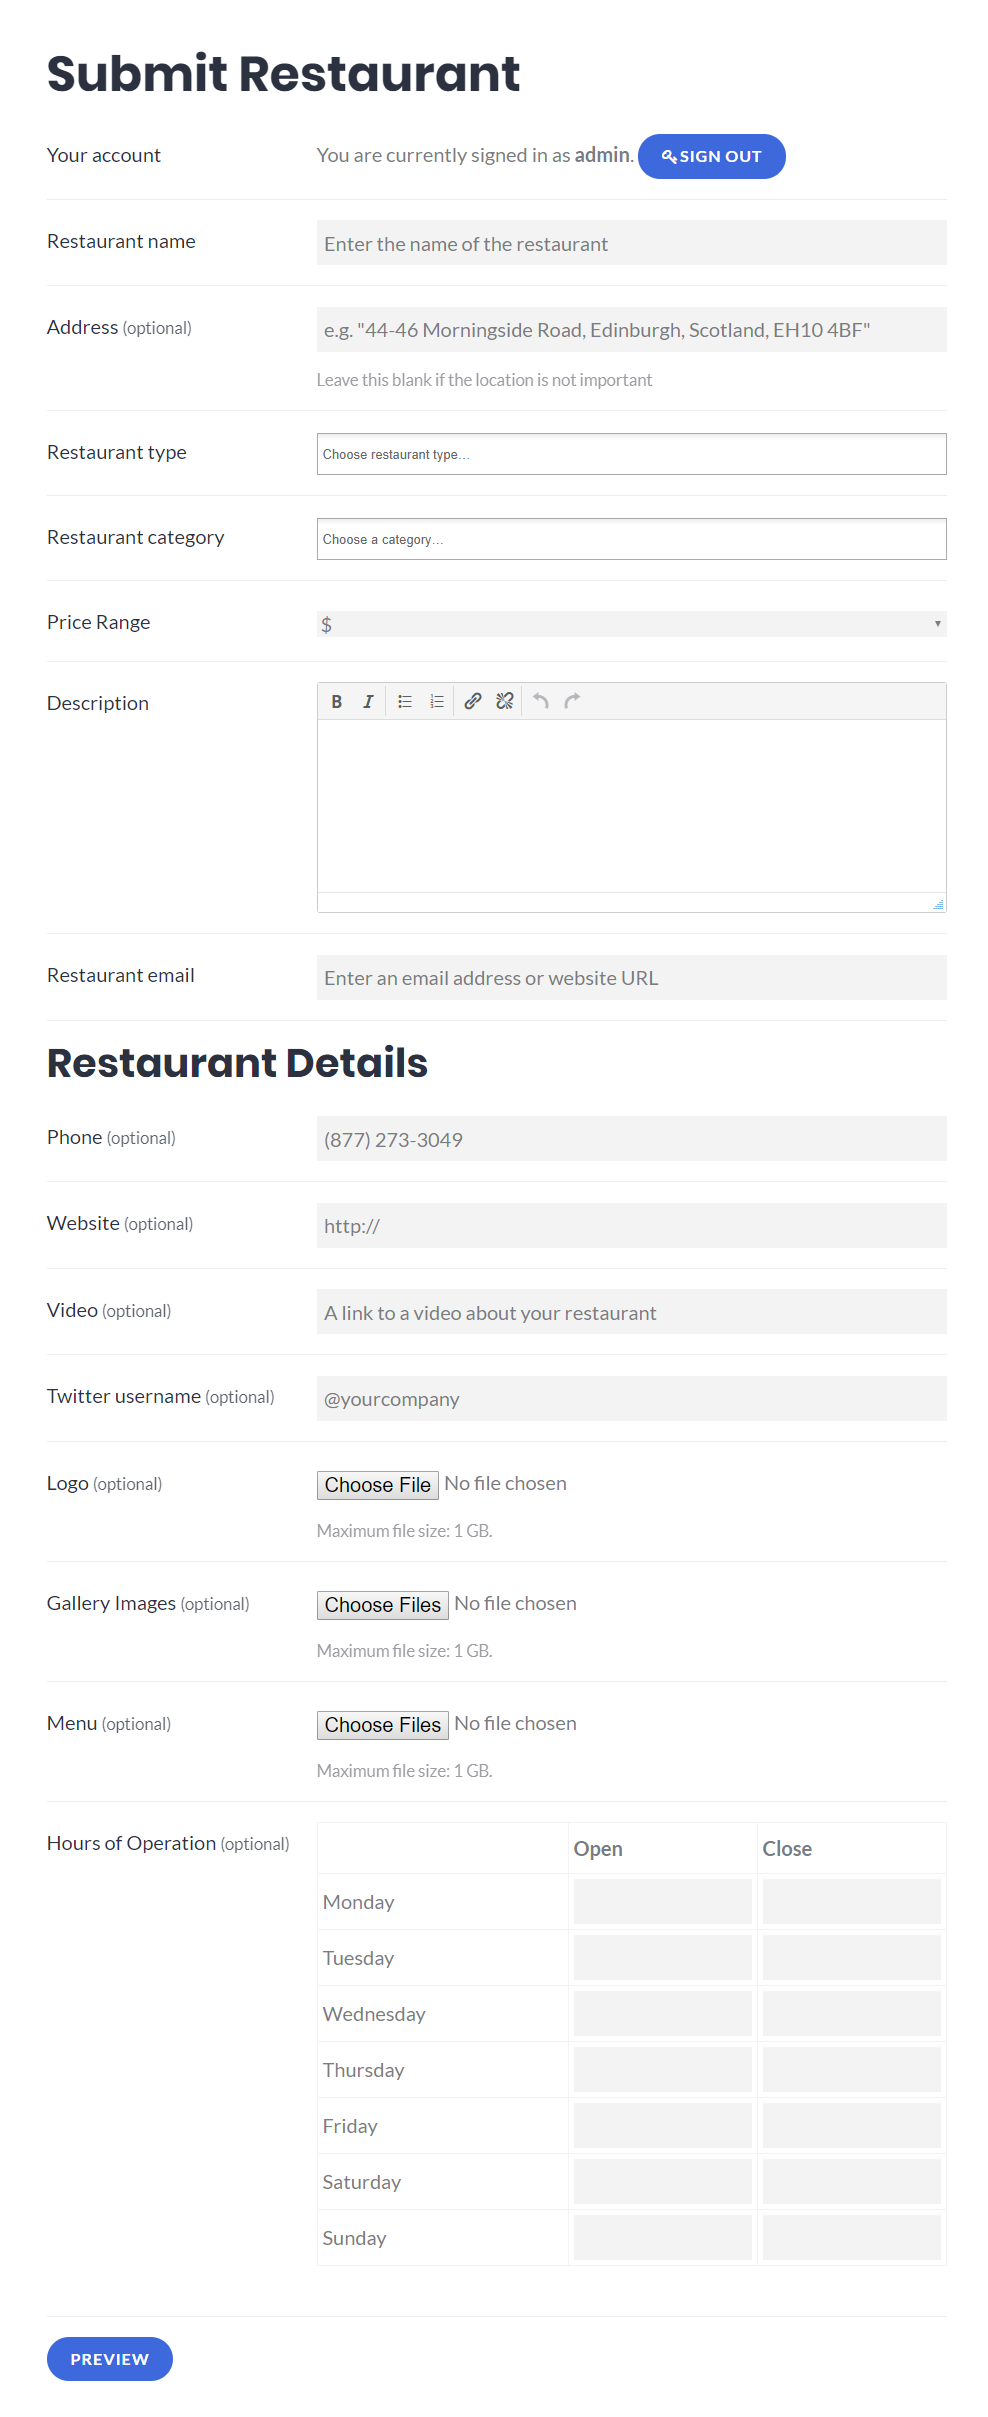 The submit restaurant form.